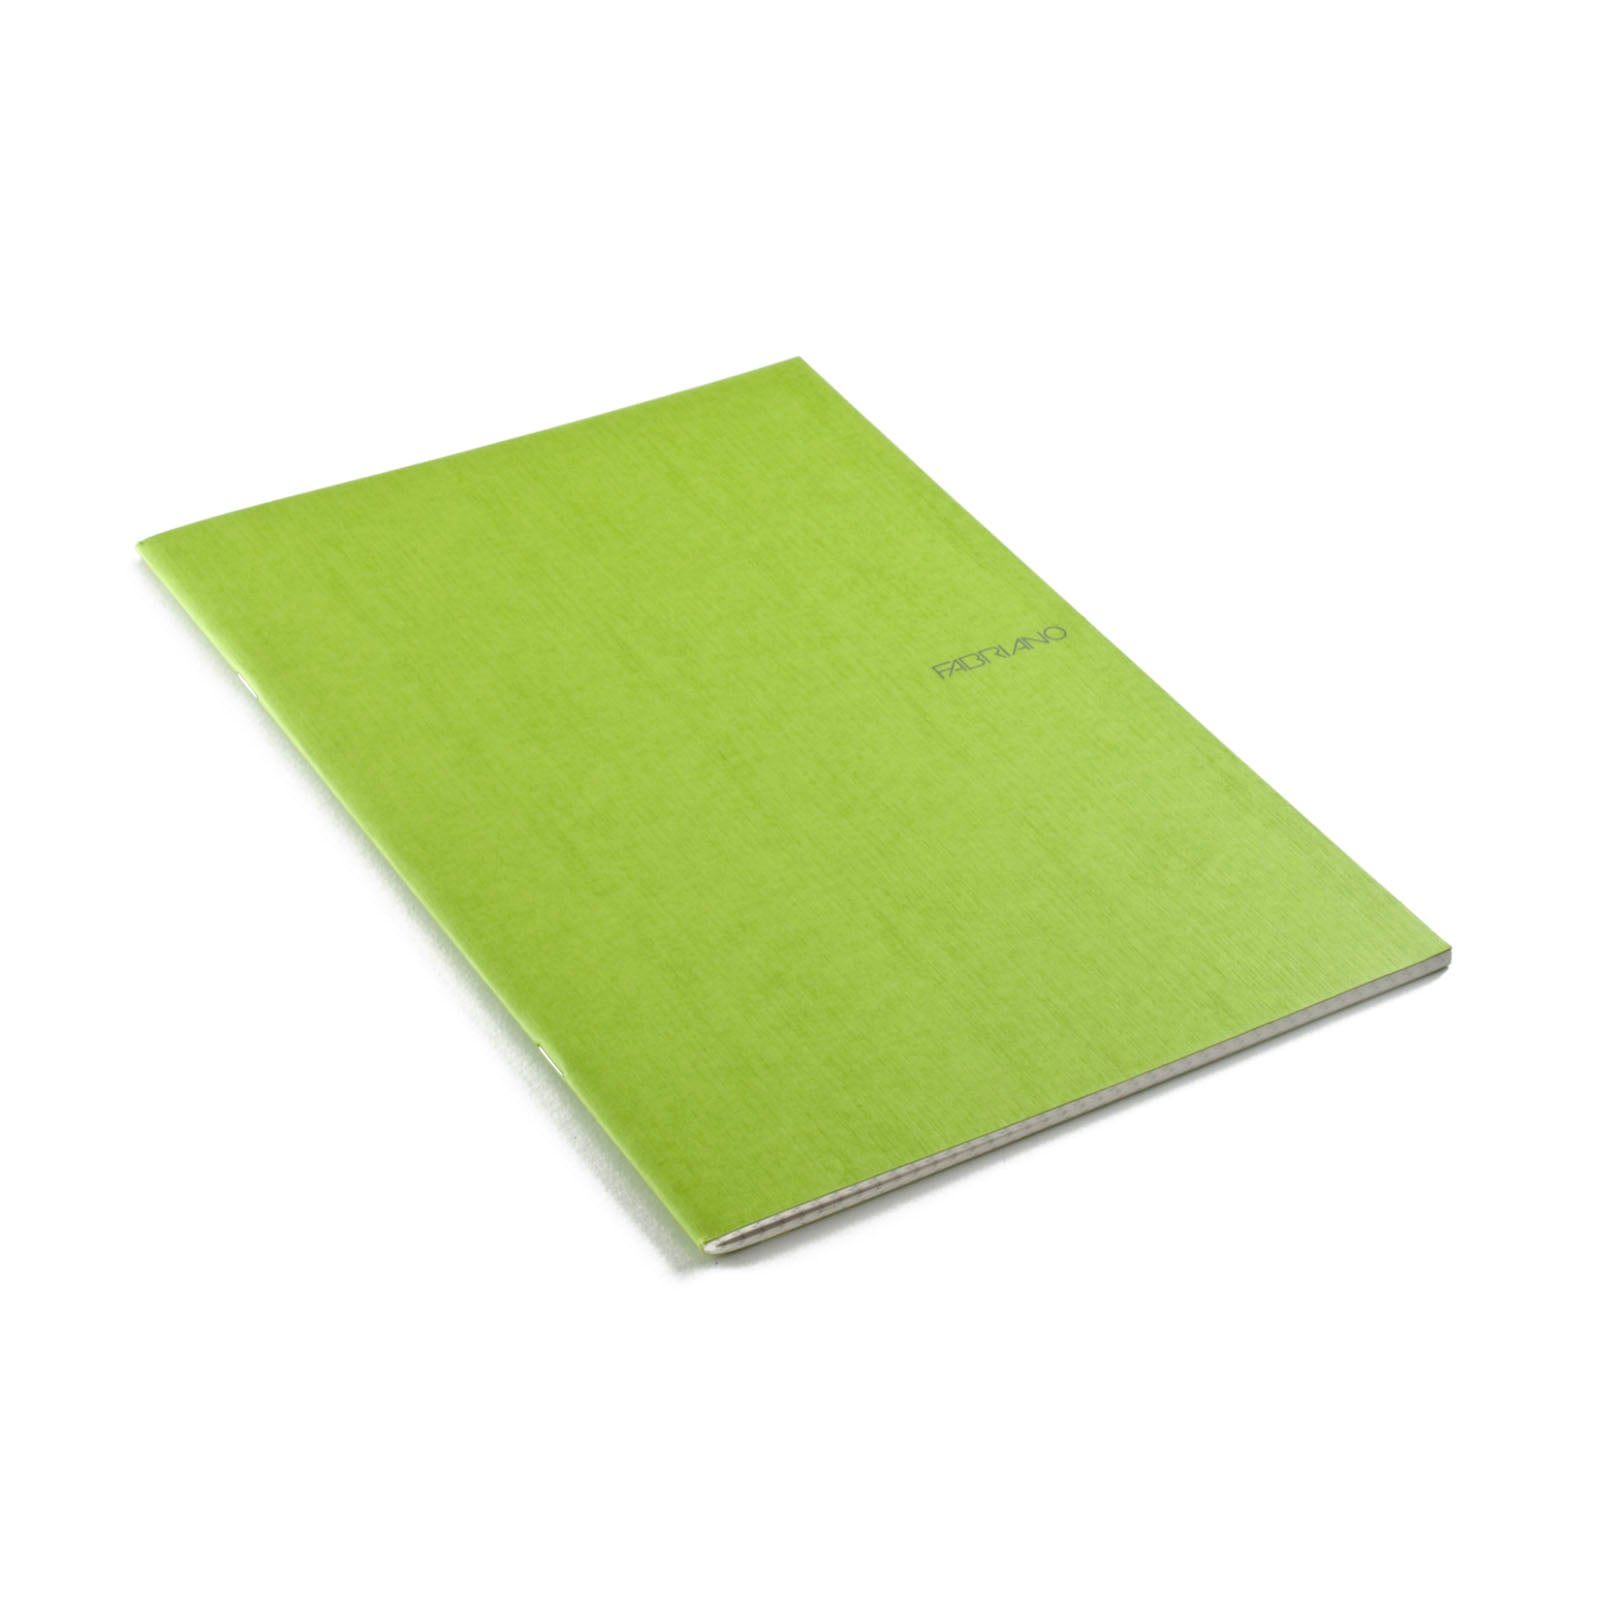 Fabriano EcoQua Notebook Large Staple-Bound Blank 38 Sheets Lime